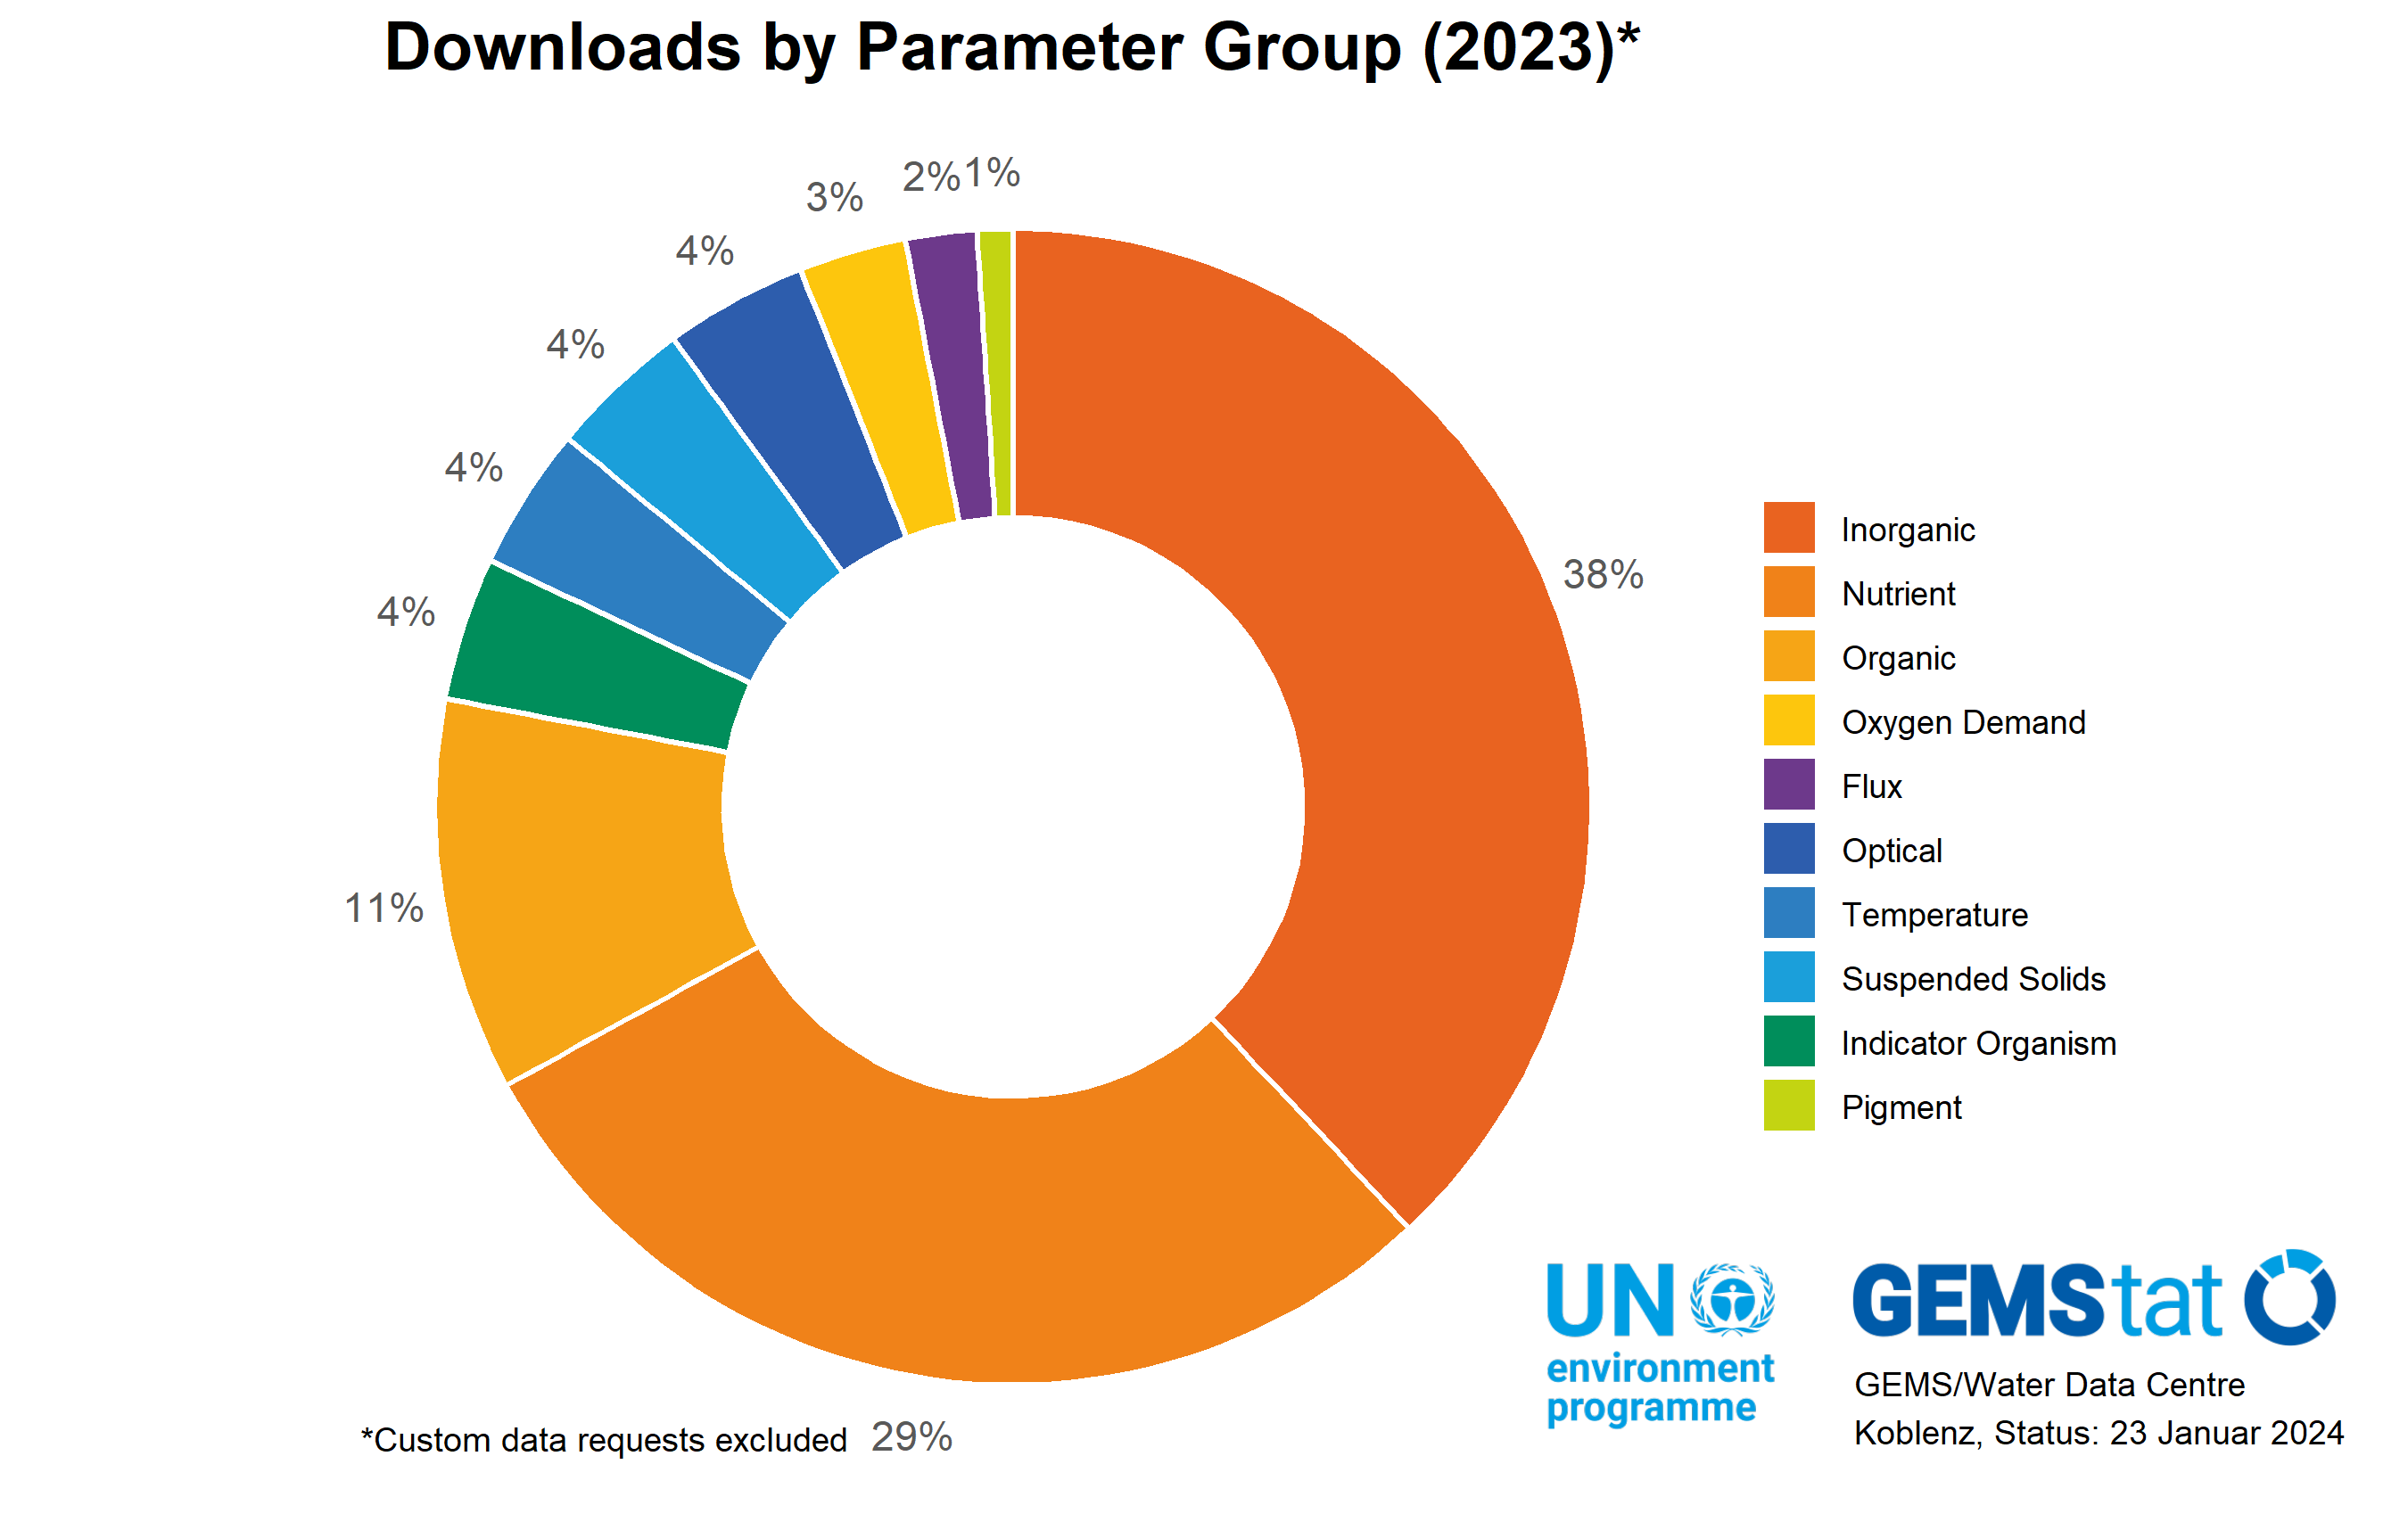 GEMStat data downloads by parameter groups in 2023